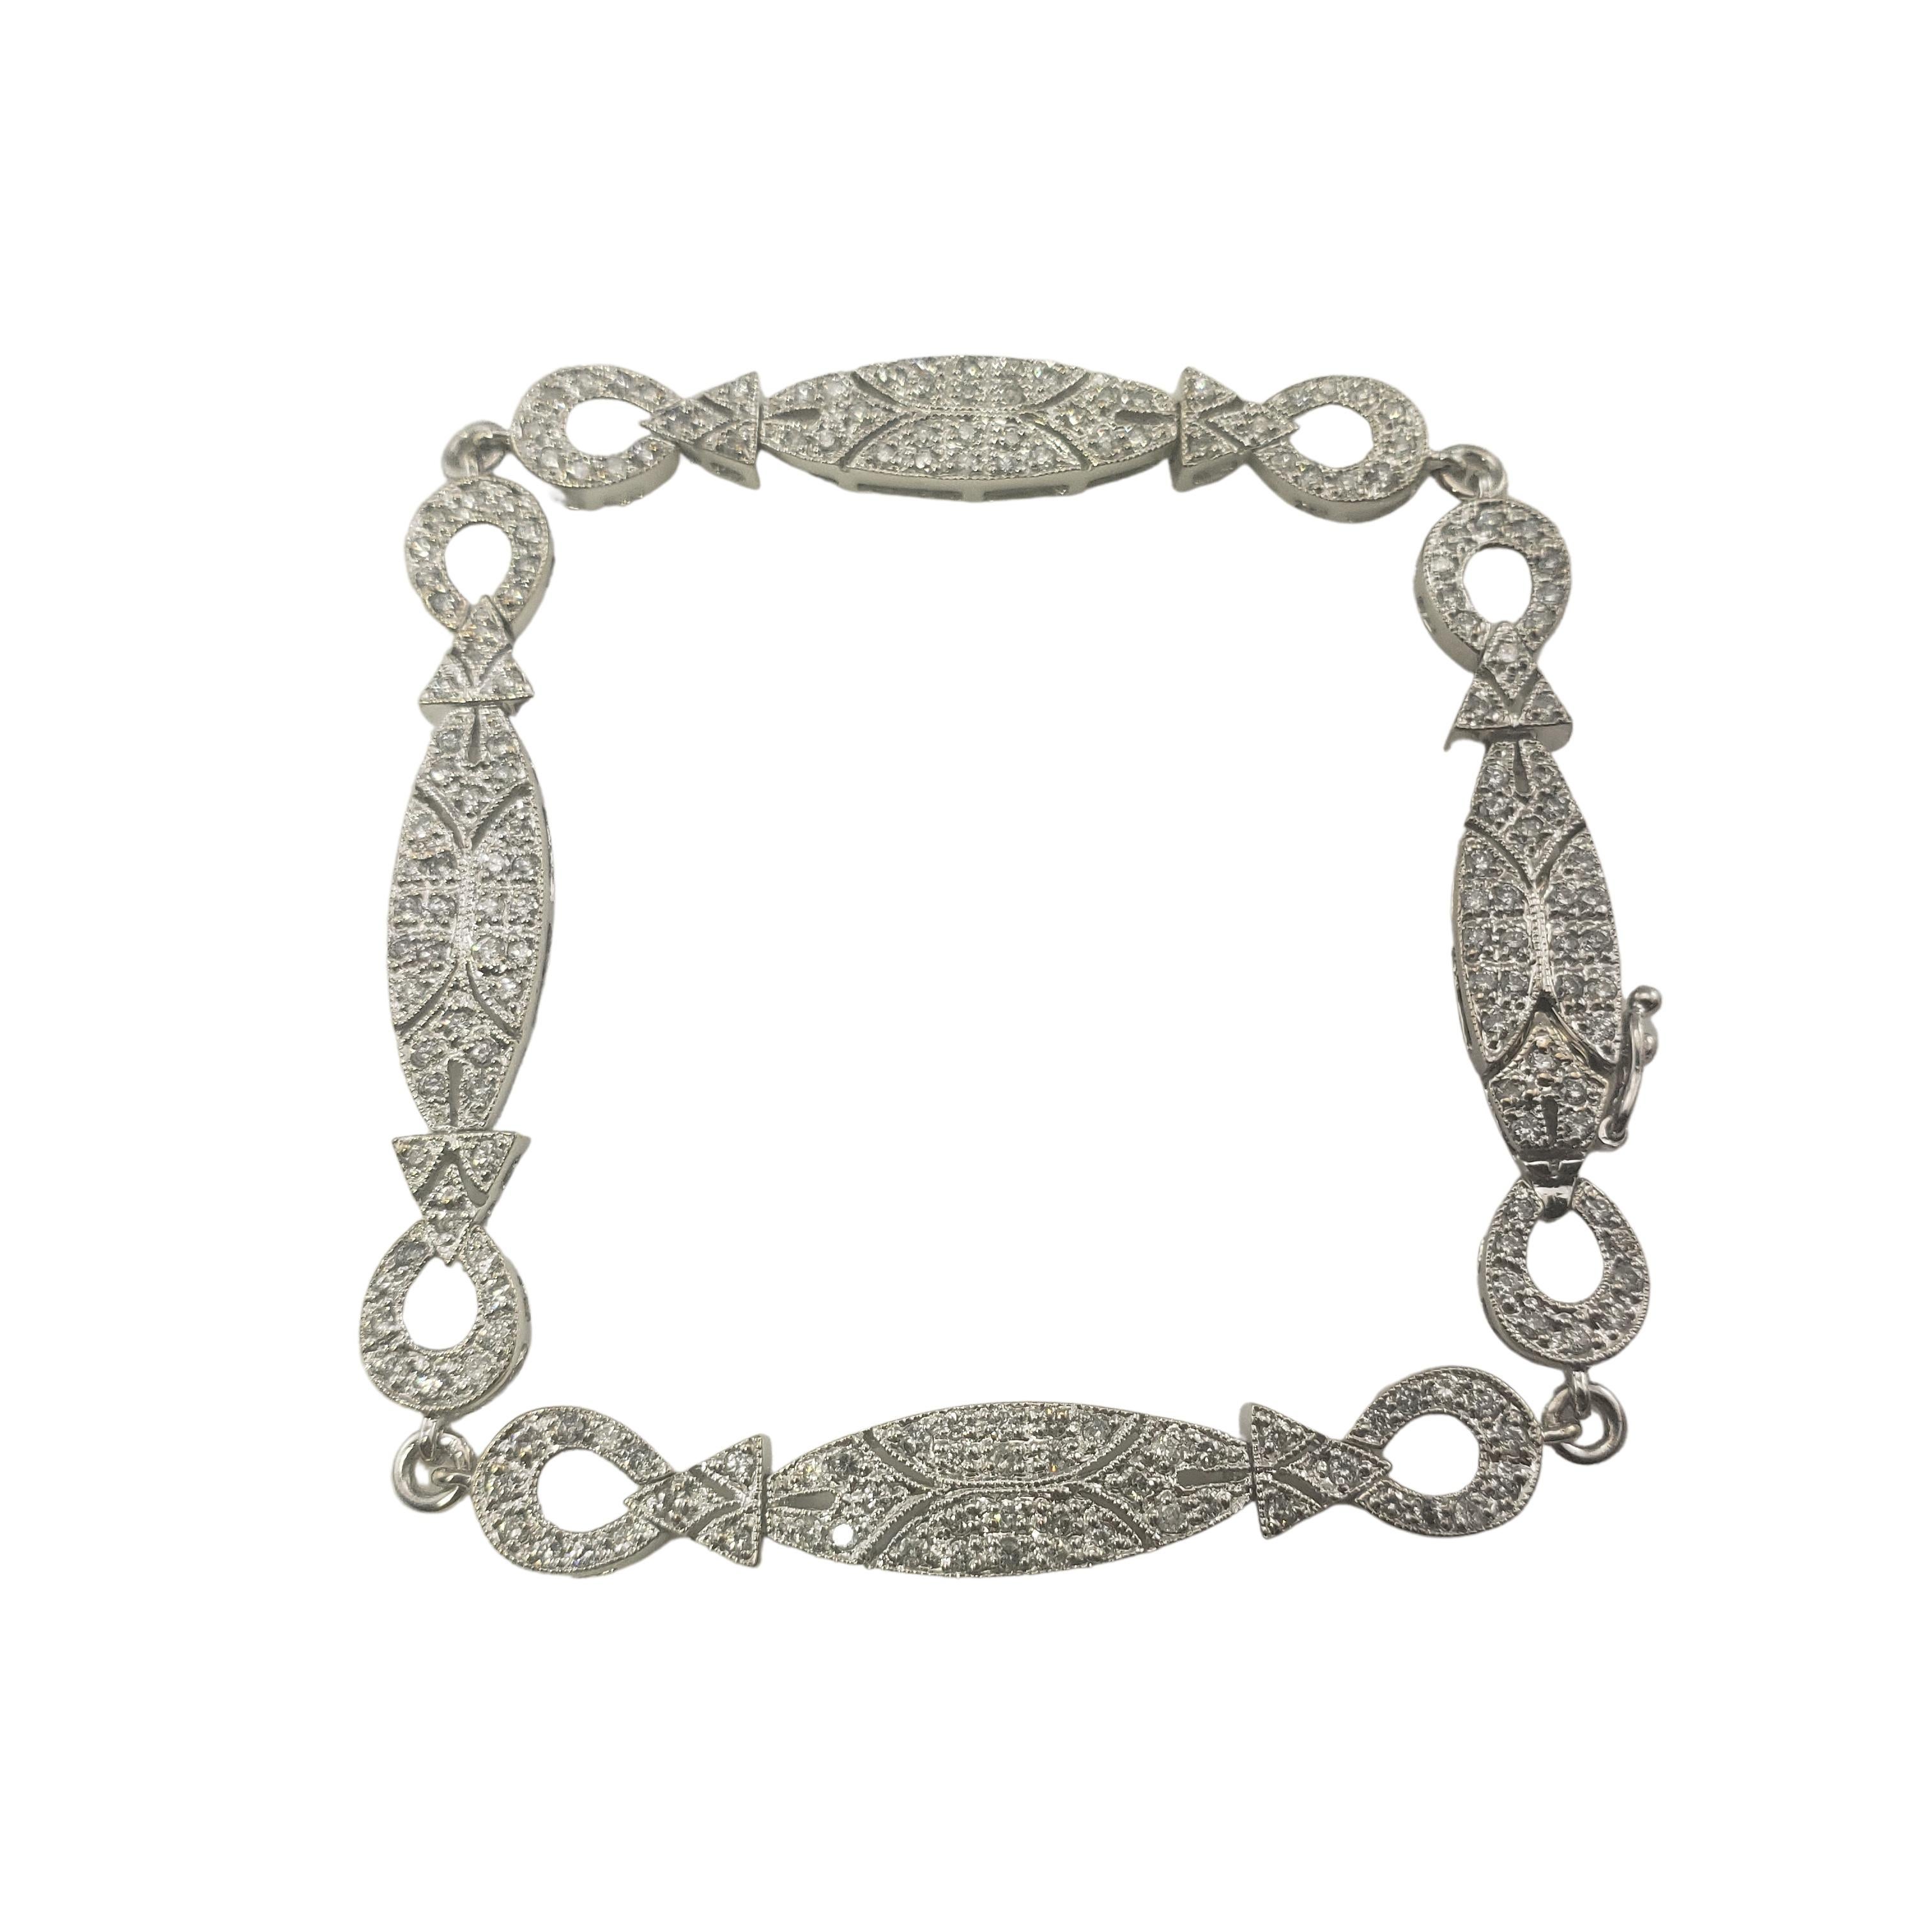 Vintage 14 Karat White Gold and Diamond Bracelet-

This sparkling bracelet features 197 round brilliant cut diamonds set in classic 14K white gold.  Width:  6 mm.

Approximate total diamond weight:  1 ct.

Diamond color:  H-I

Diamond clarity: